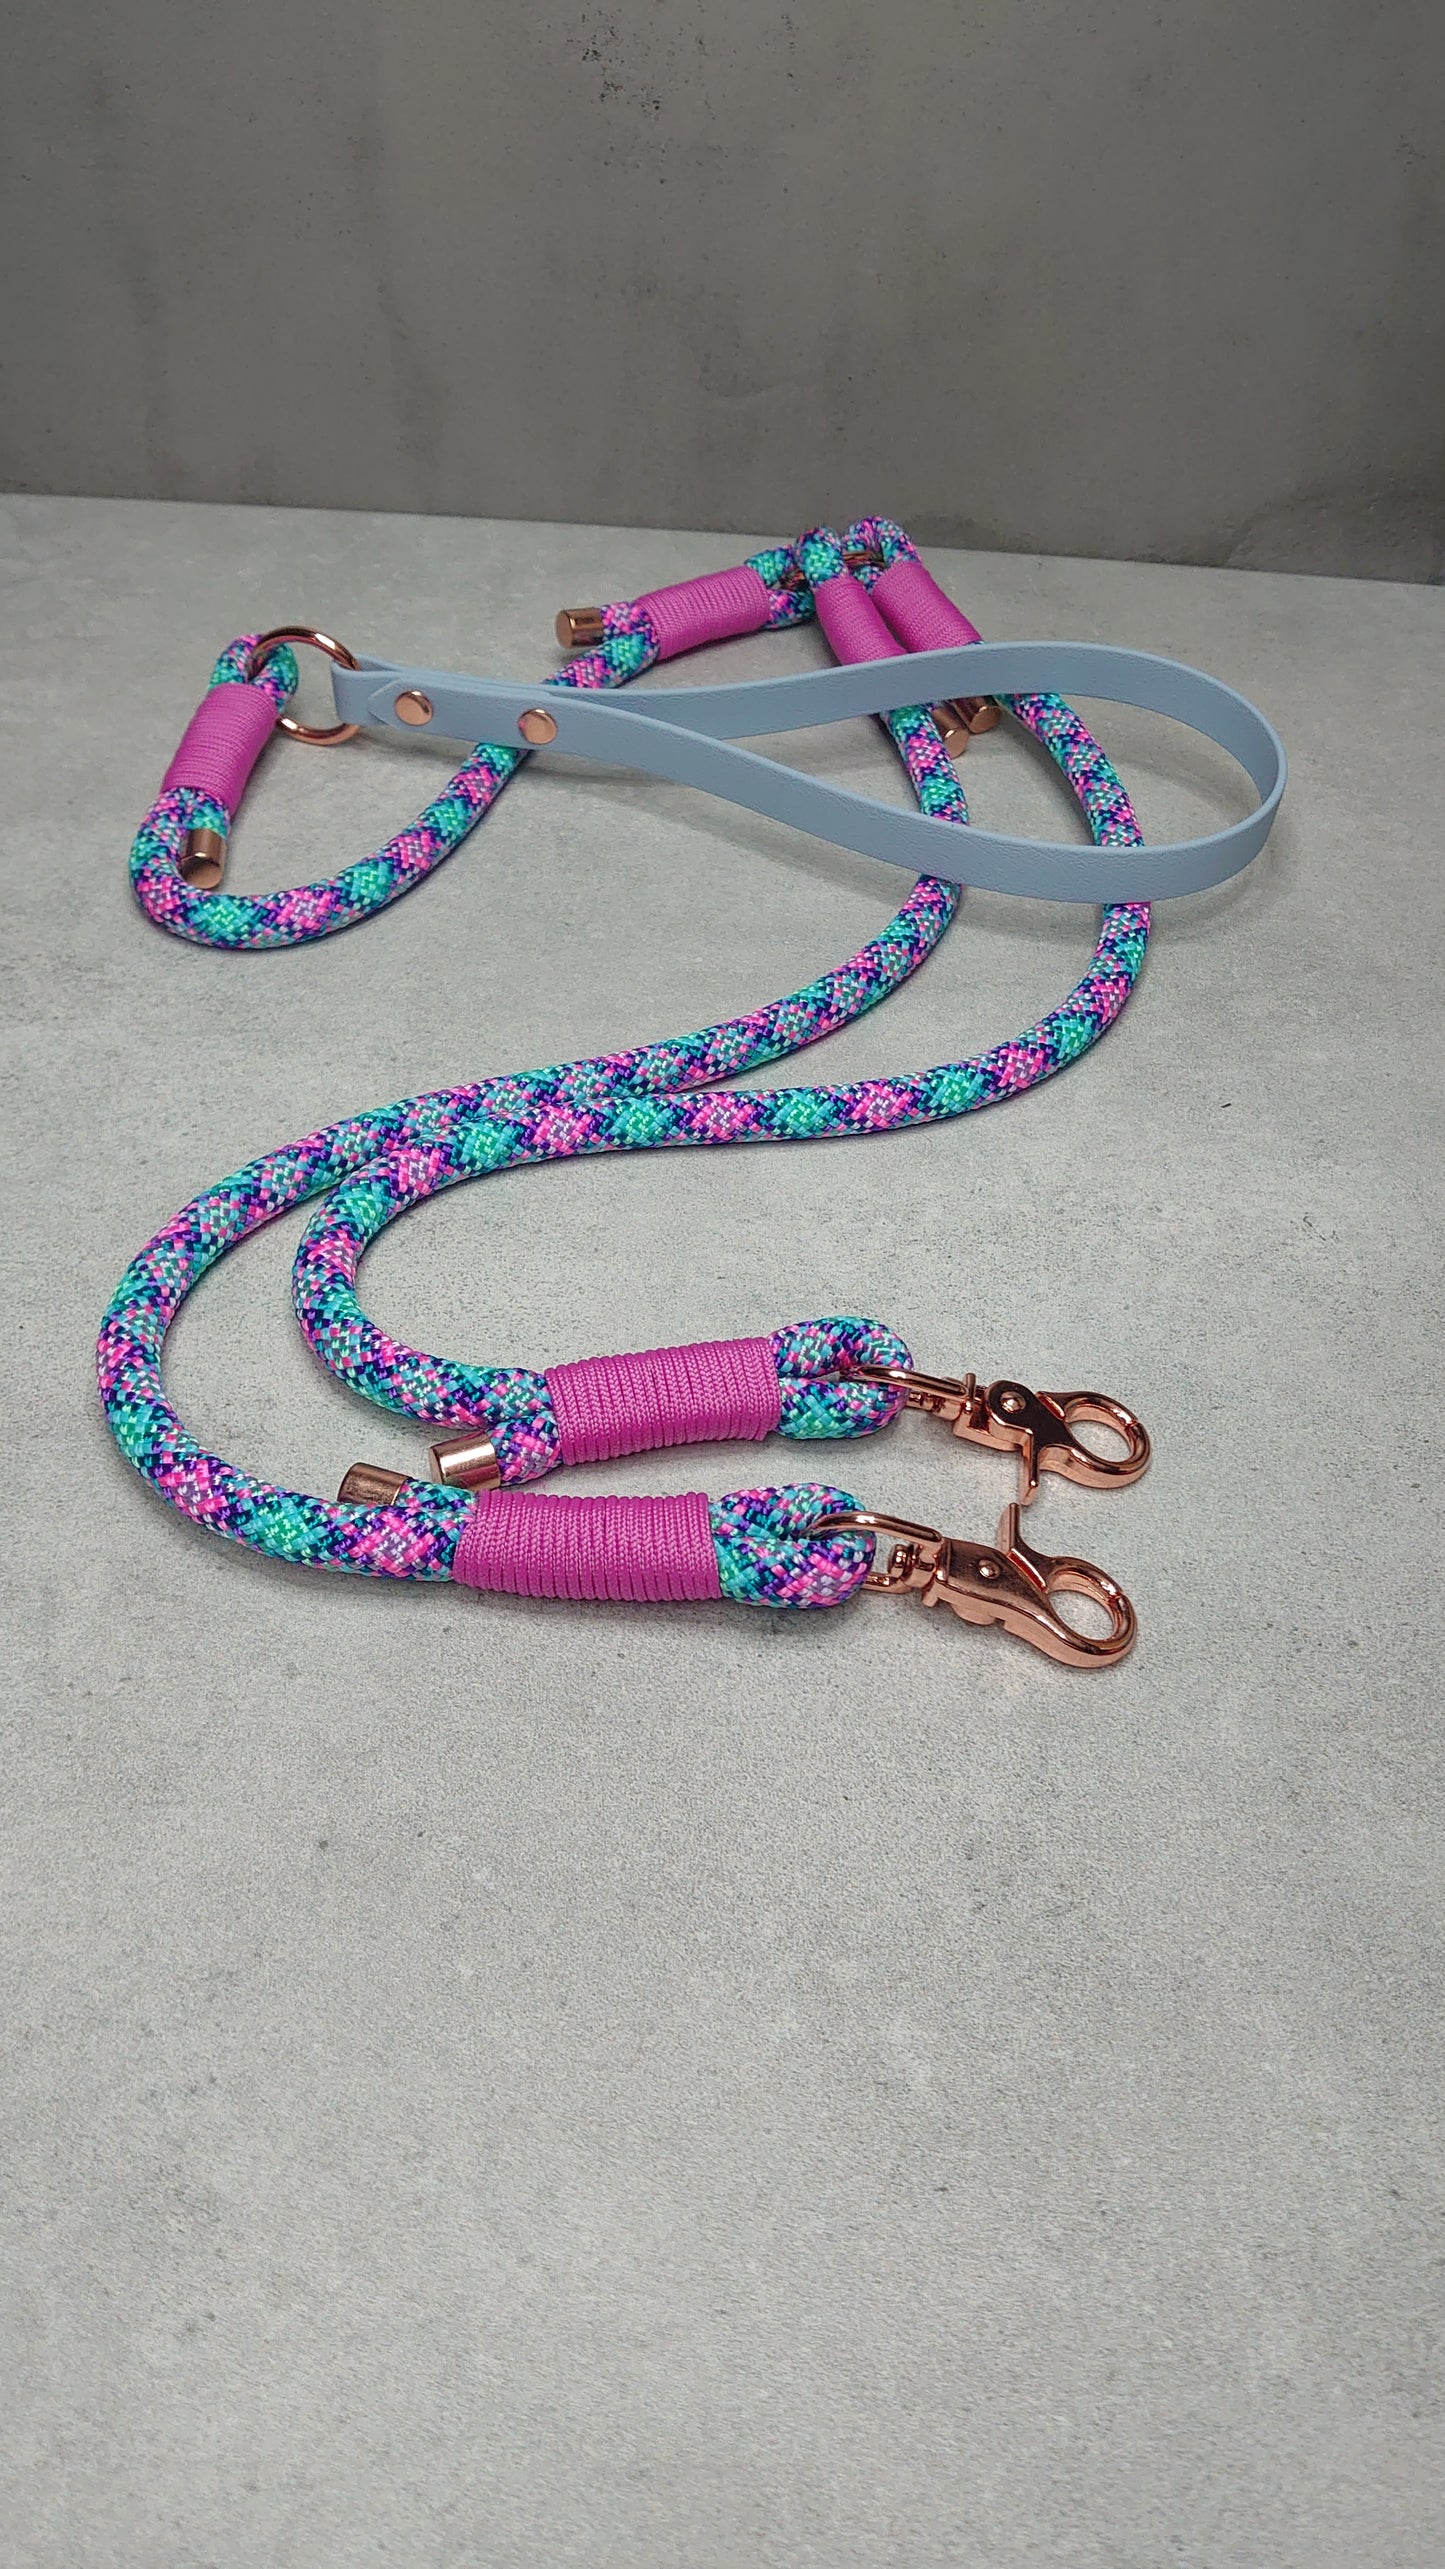 Split rope lead with biothane handle - Design your own